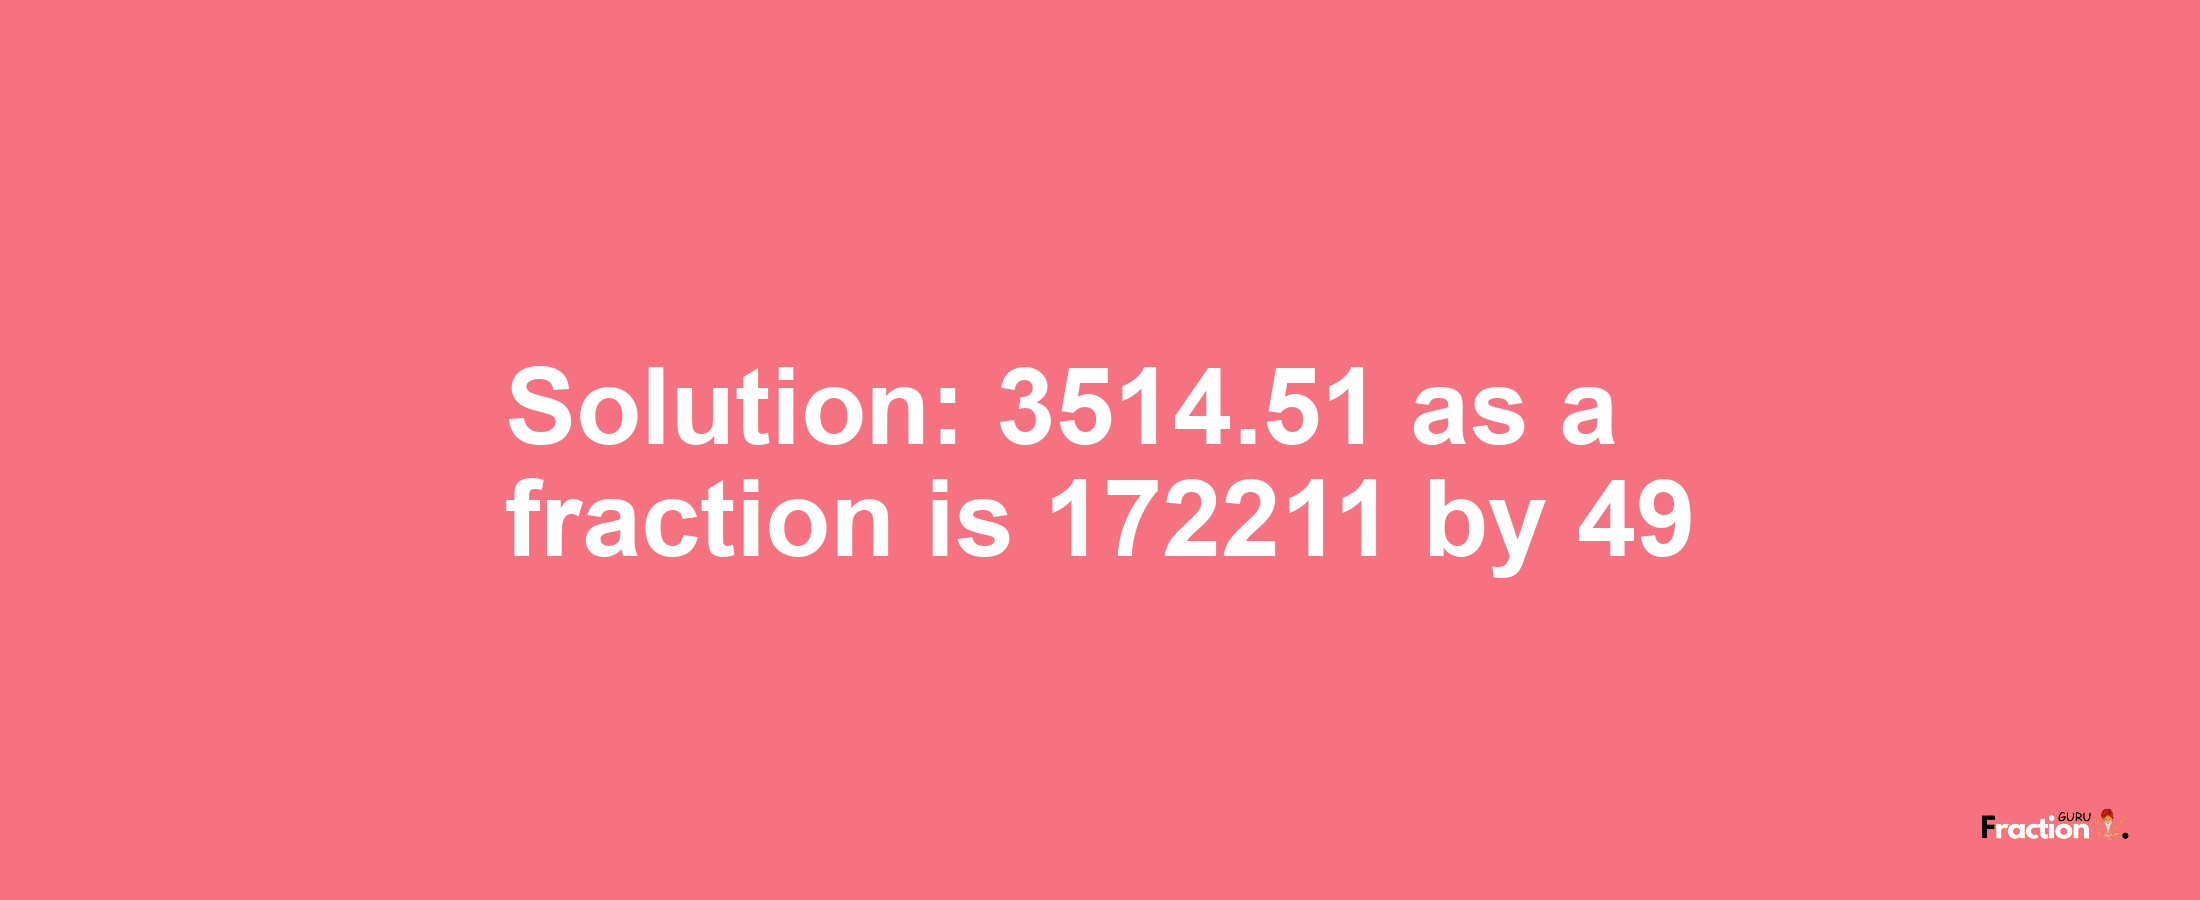 Solution:3514.51 as a fraction is 172211/49